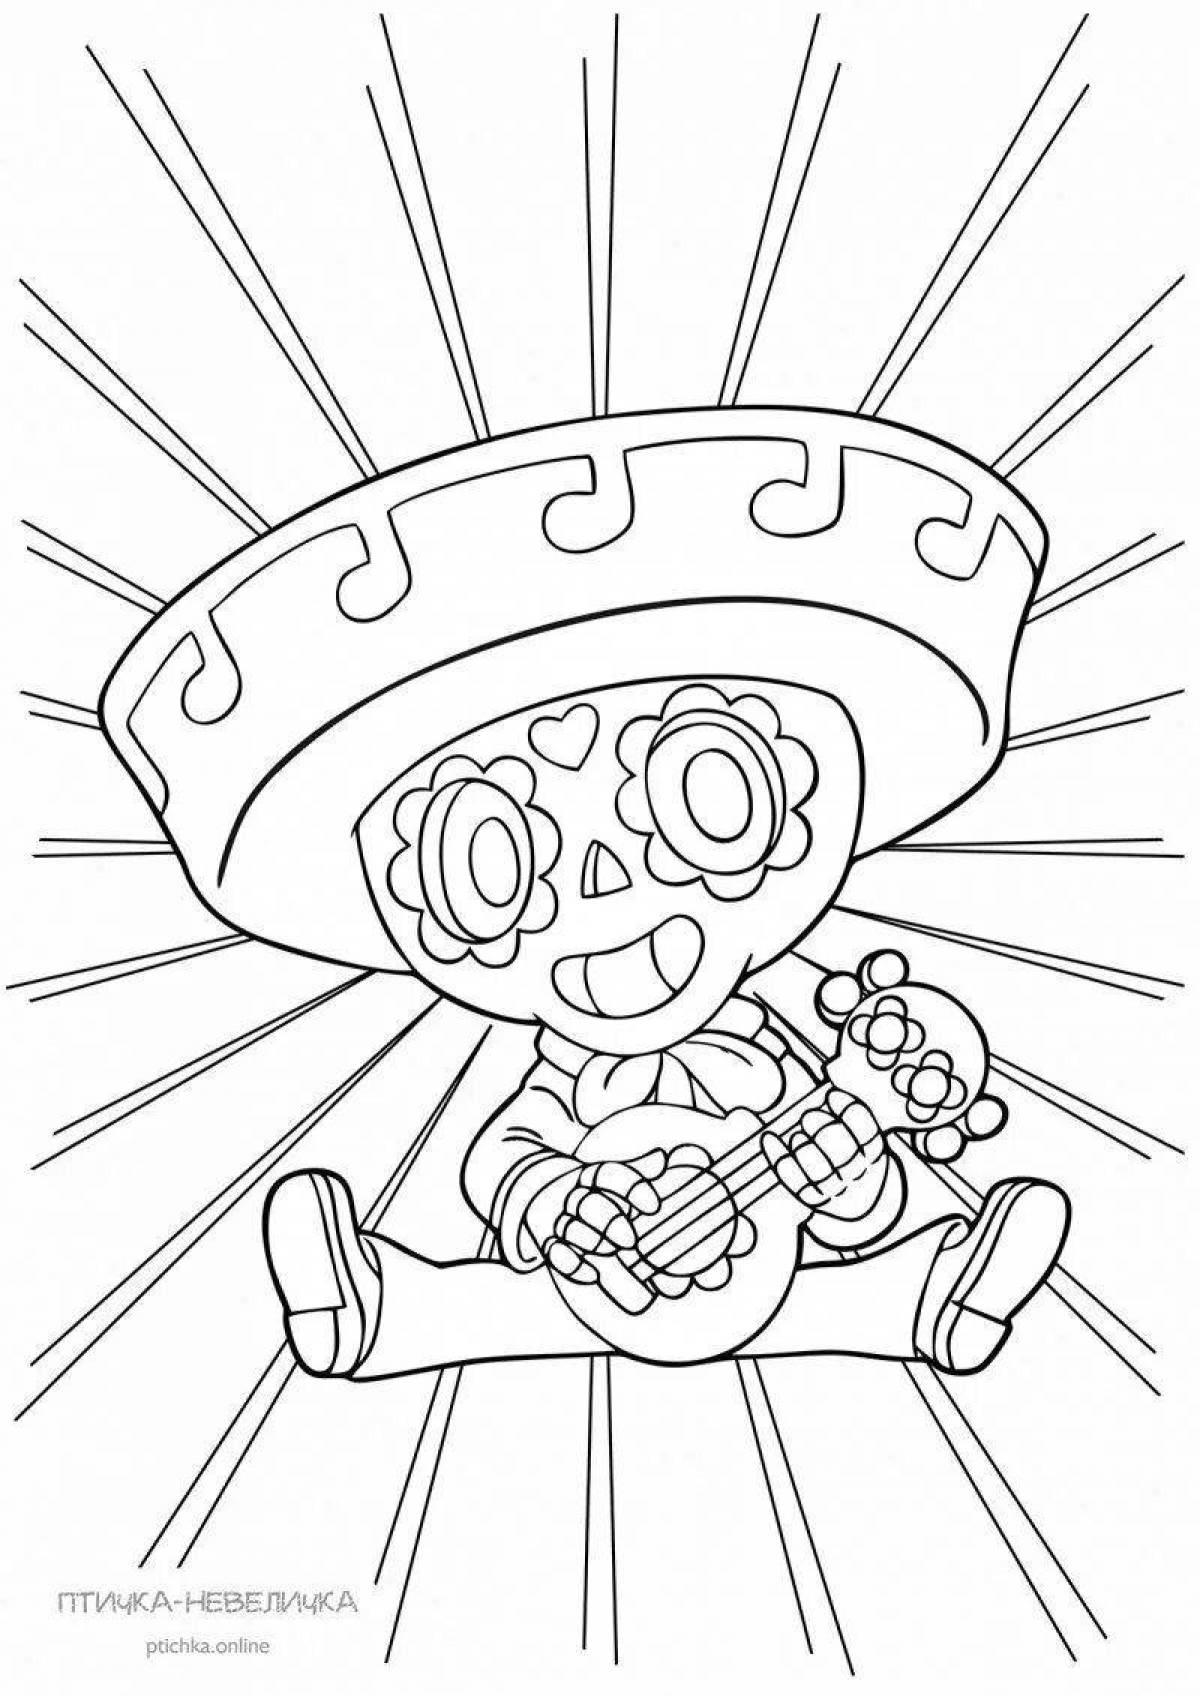 Incredible bad container coloring page